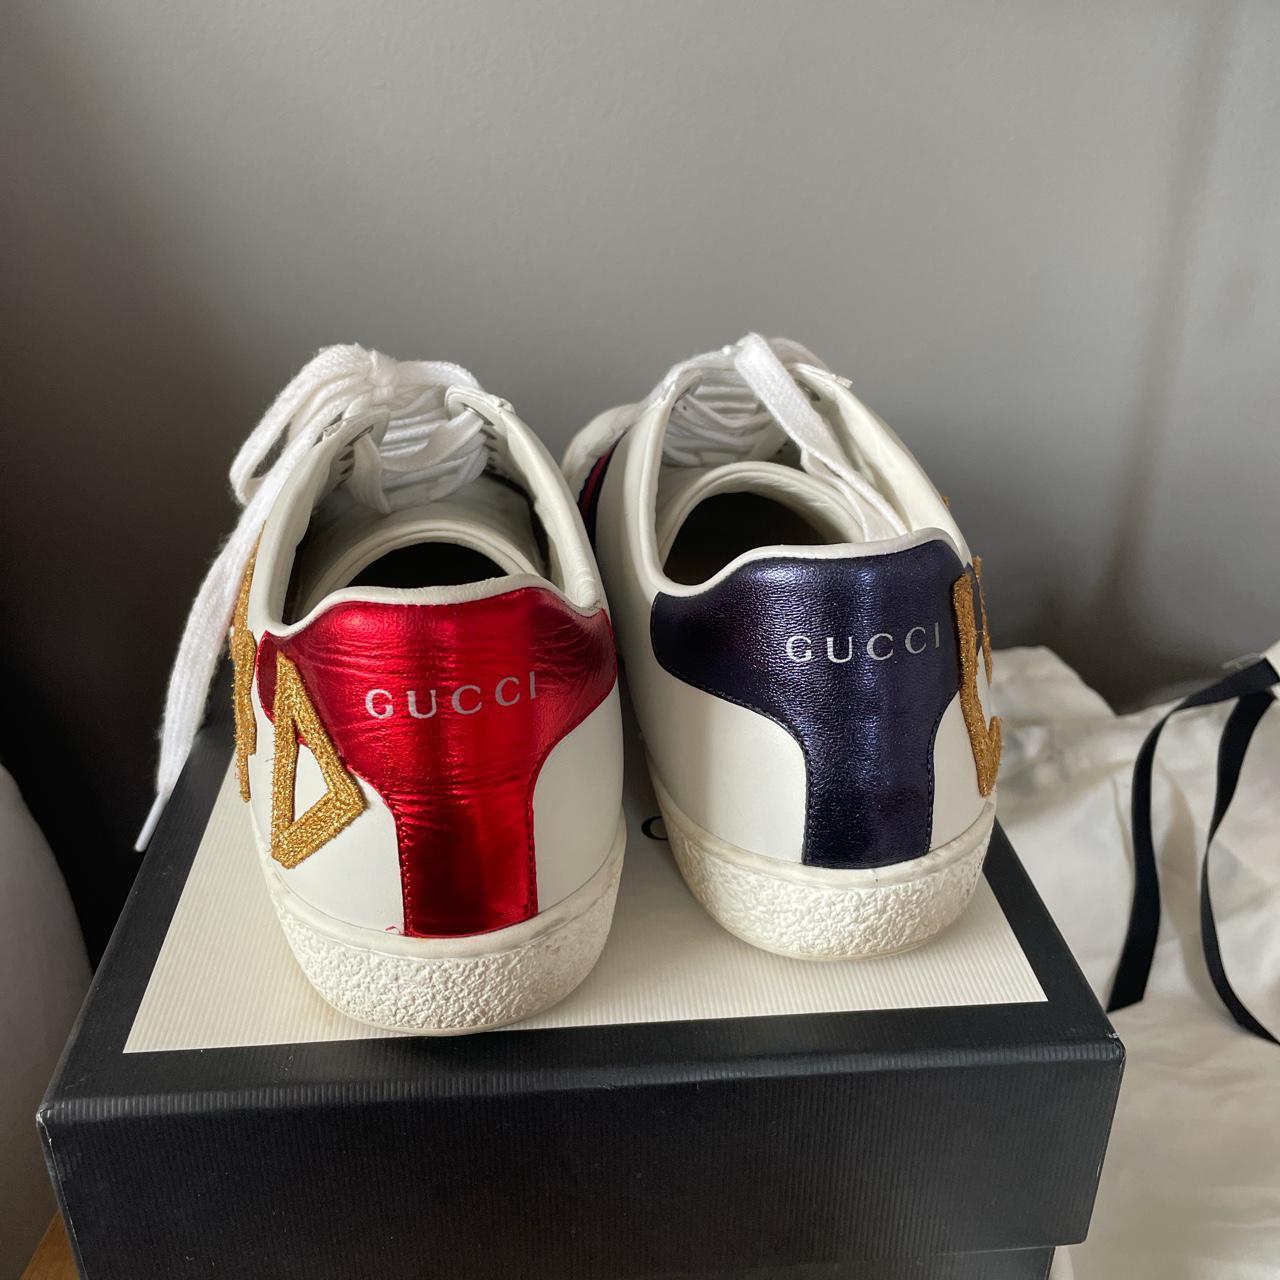 Product Image 2 - Authentic Gucci trainers. Work a